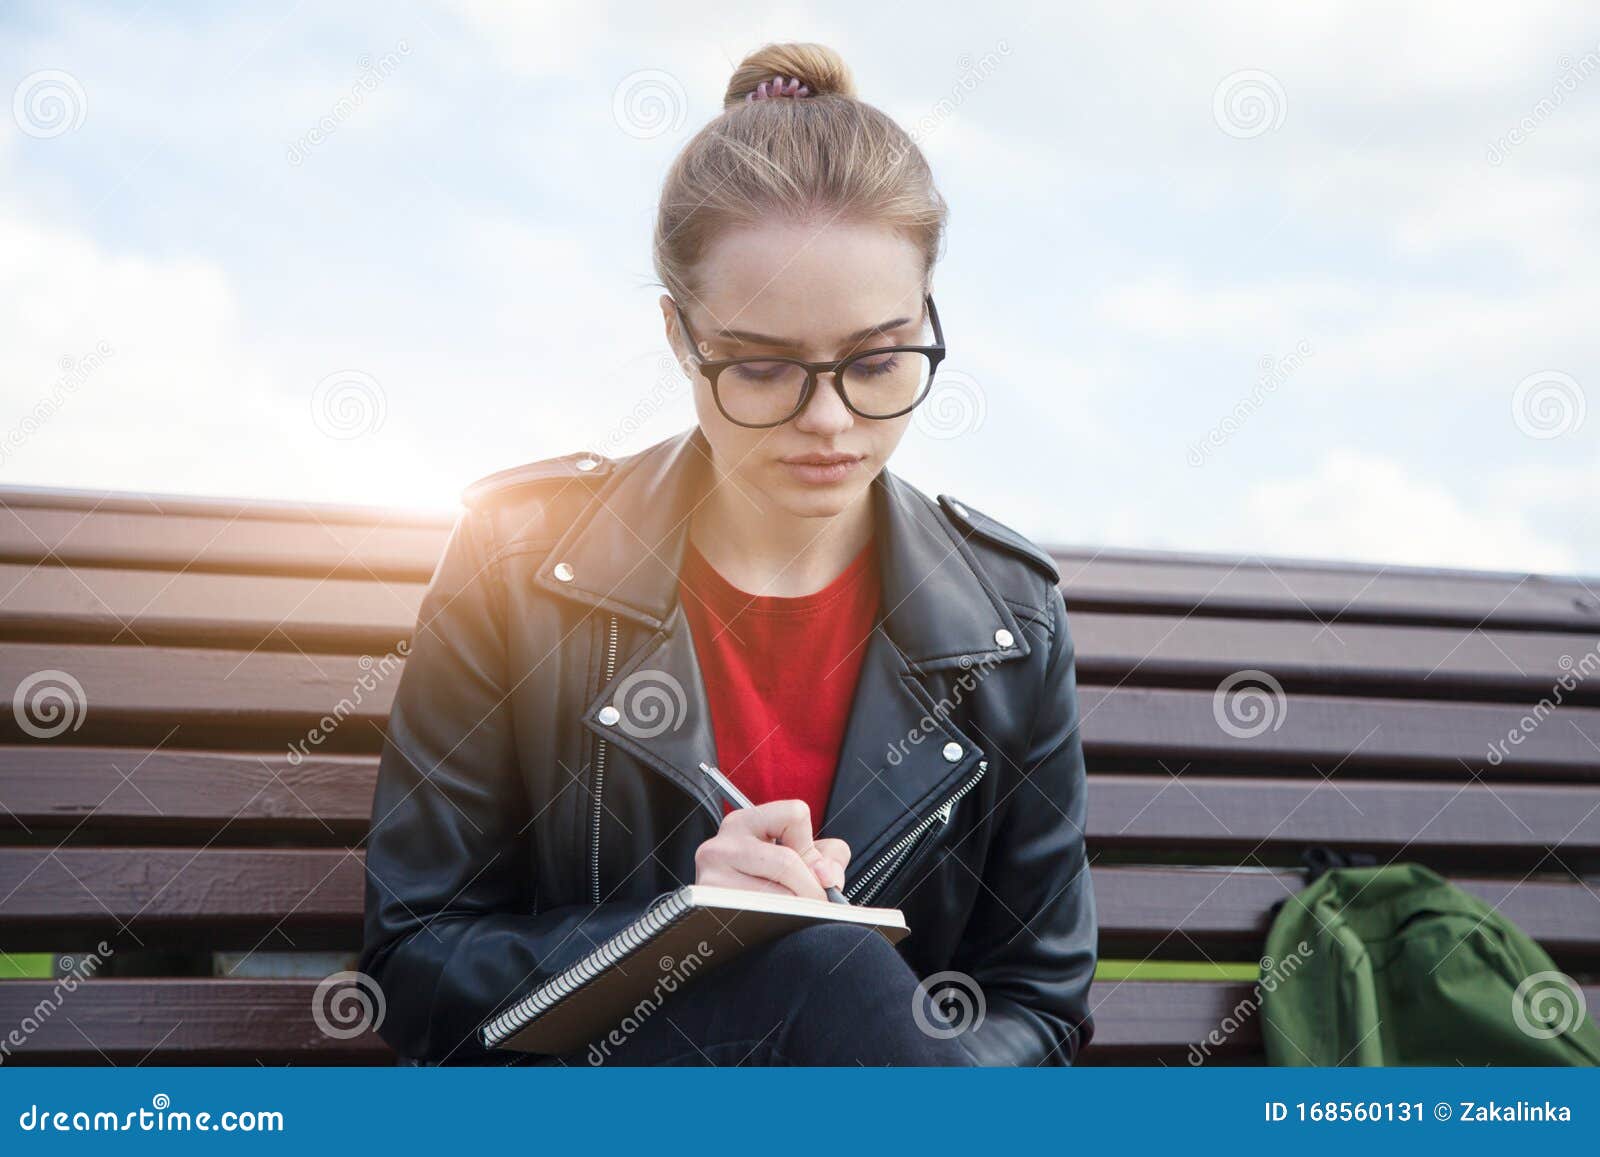 Young Woman Wearing Eyeglasses Writing Notes on Notebook with Pen ...